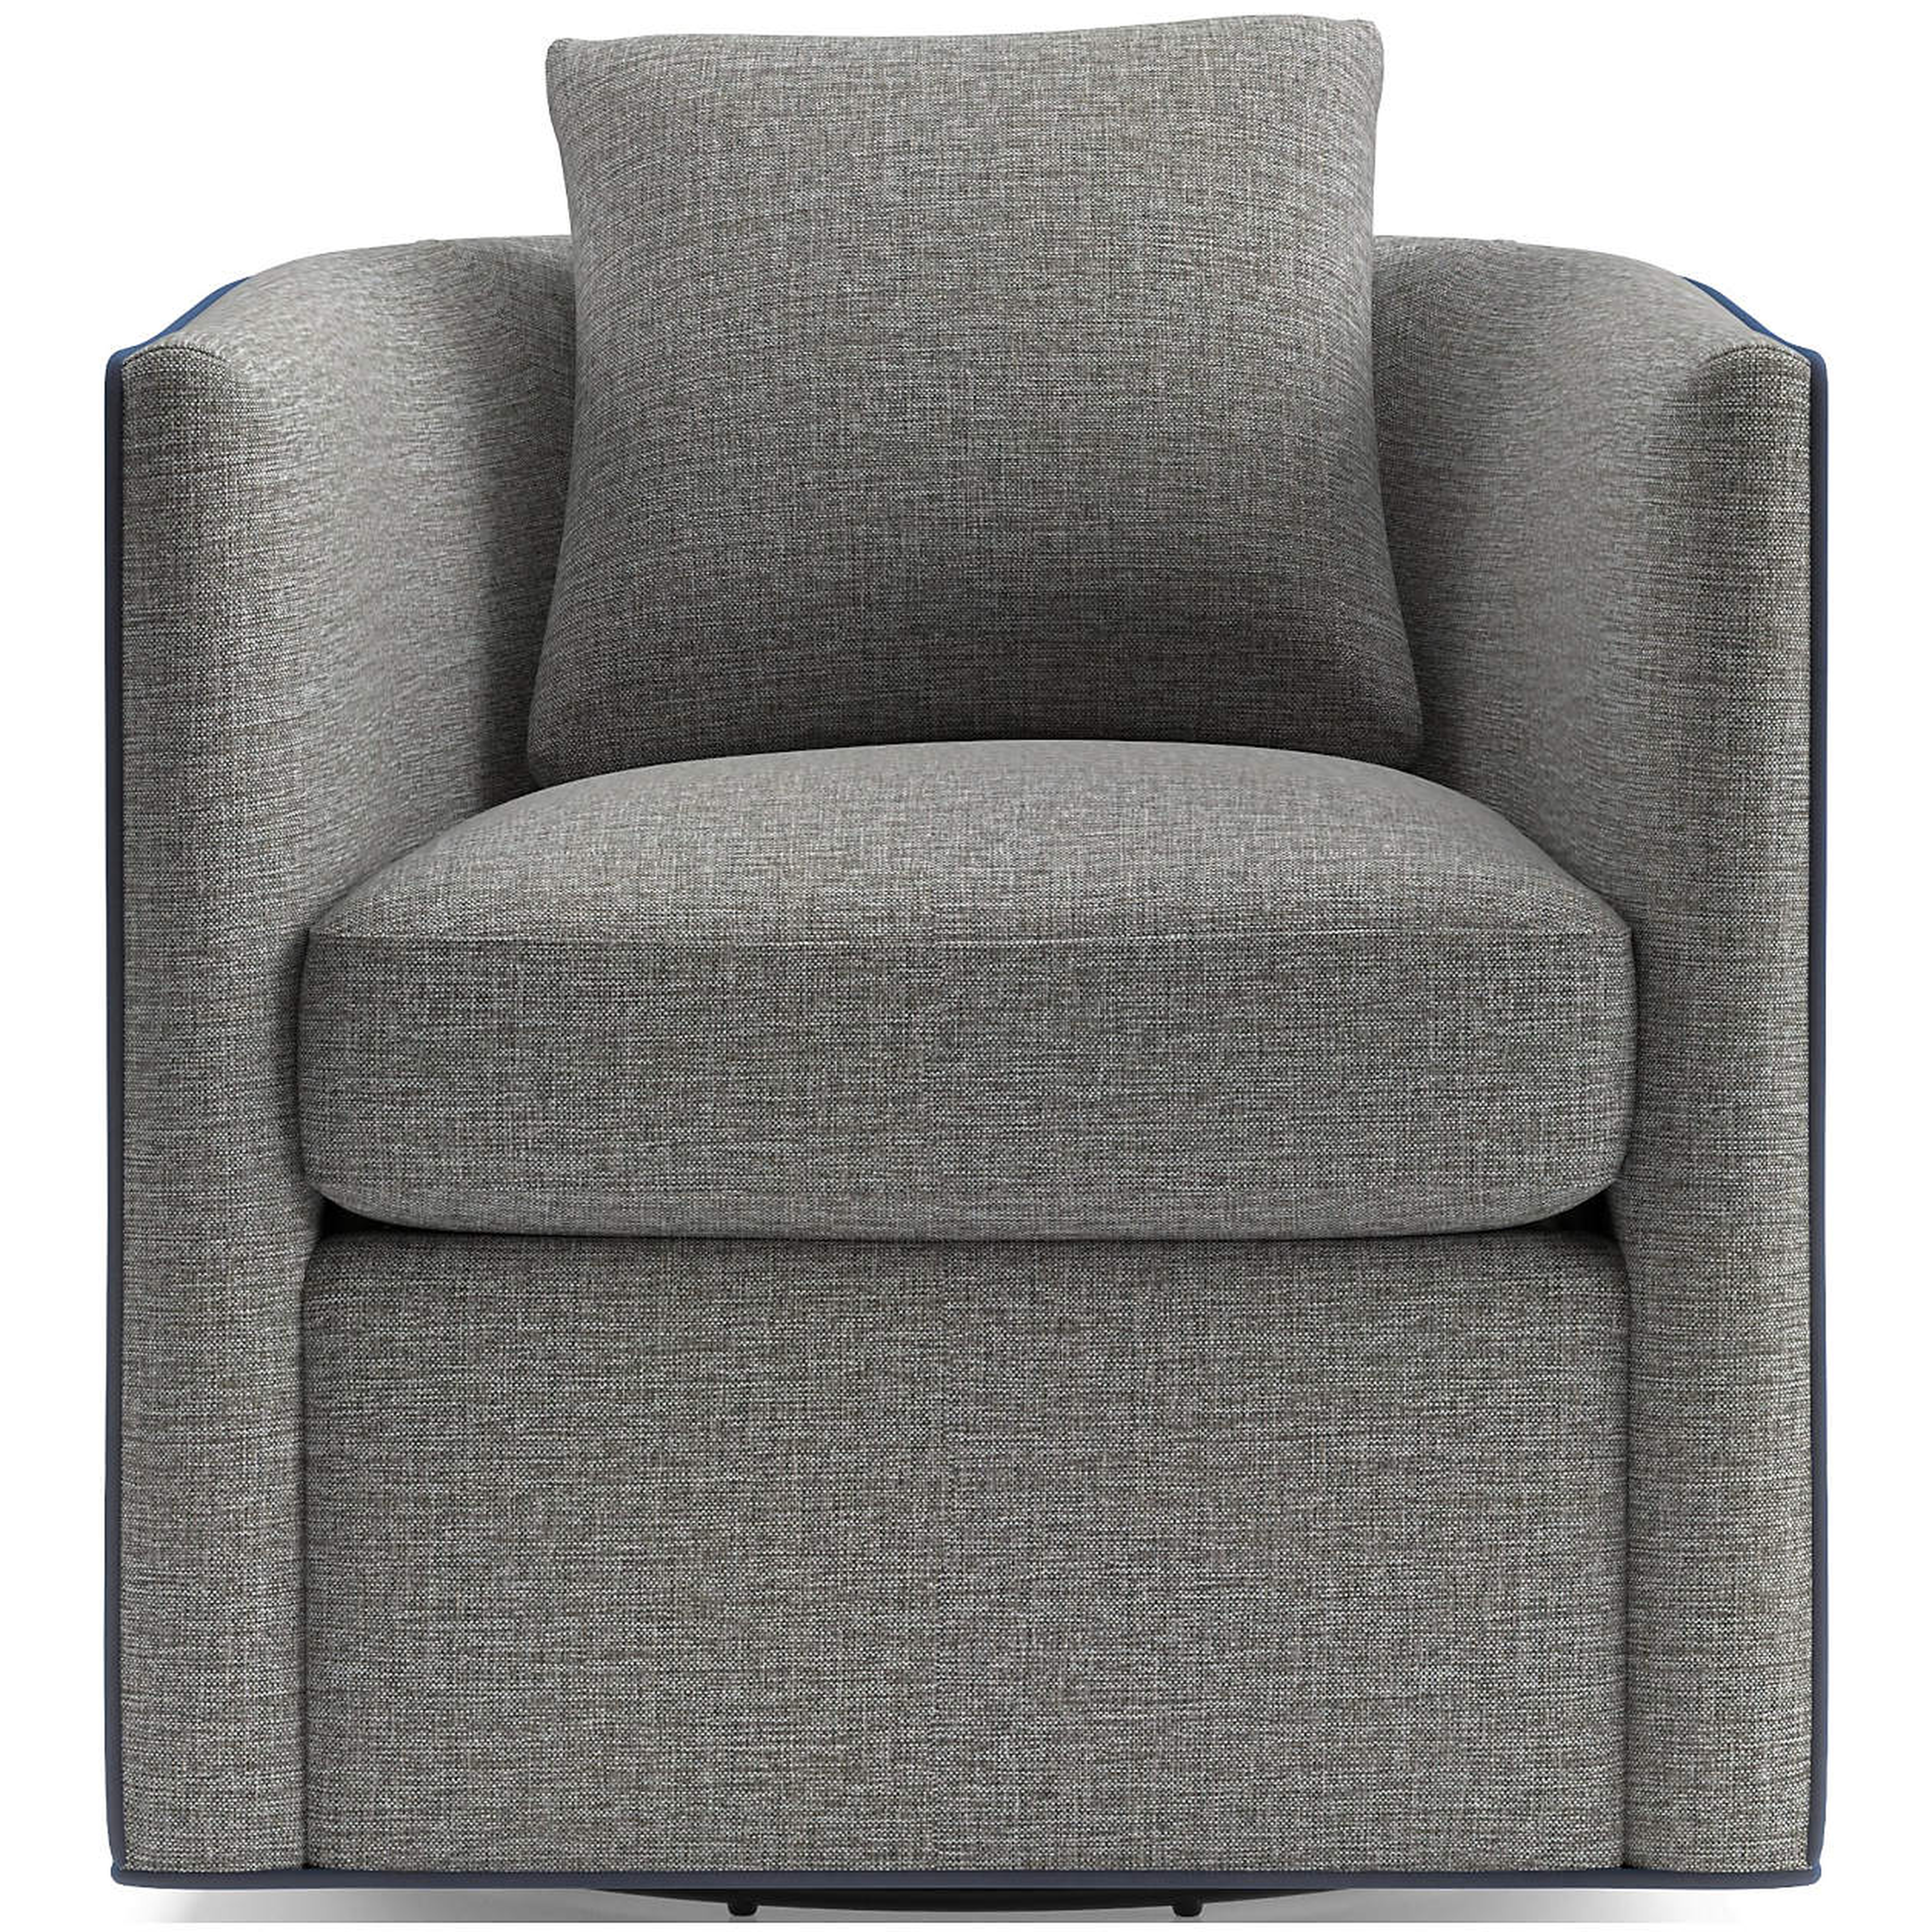 Drew Small Swivel Chair - Crate and Barrel